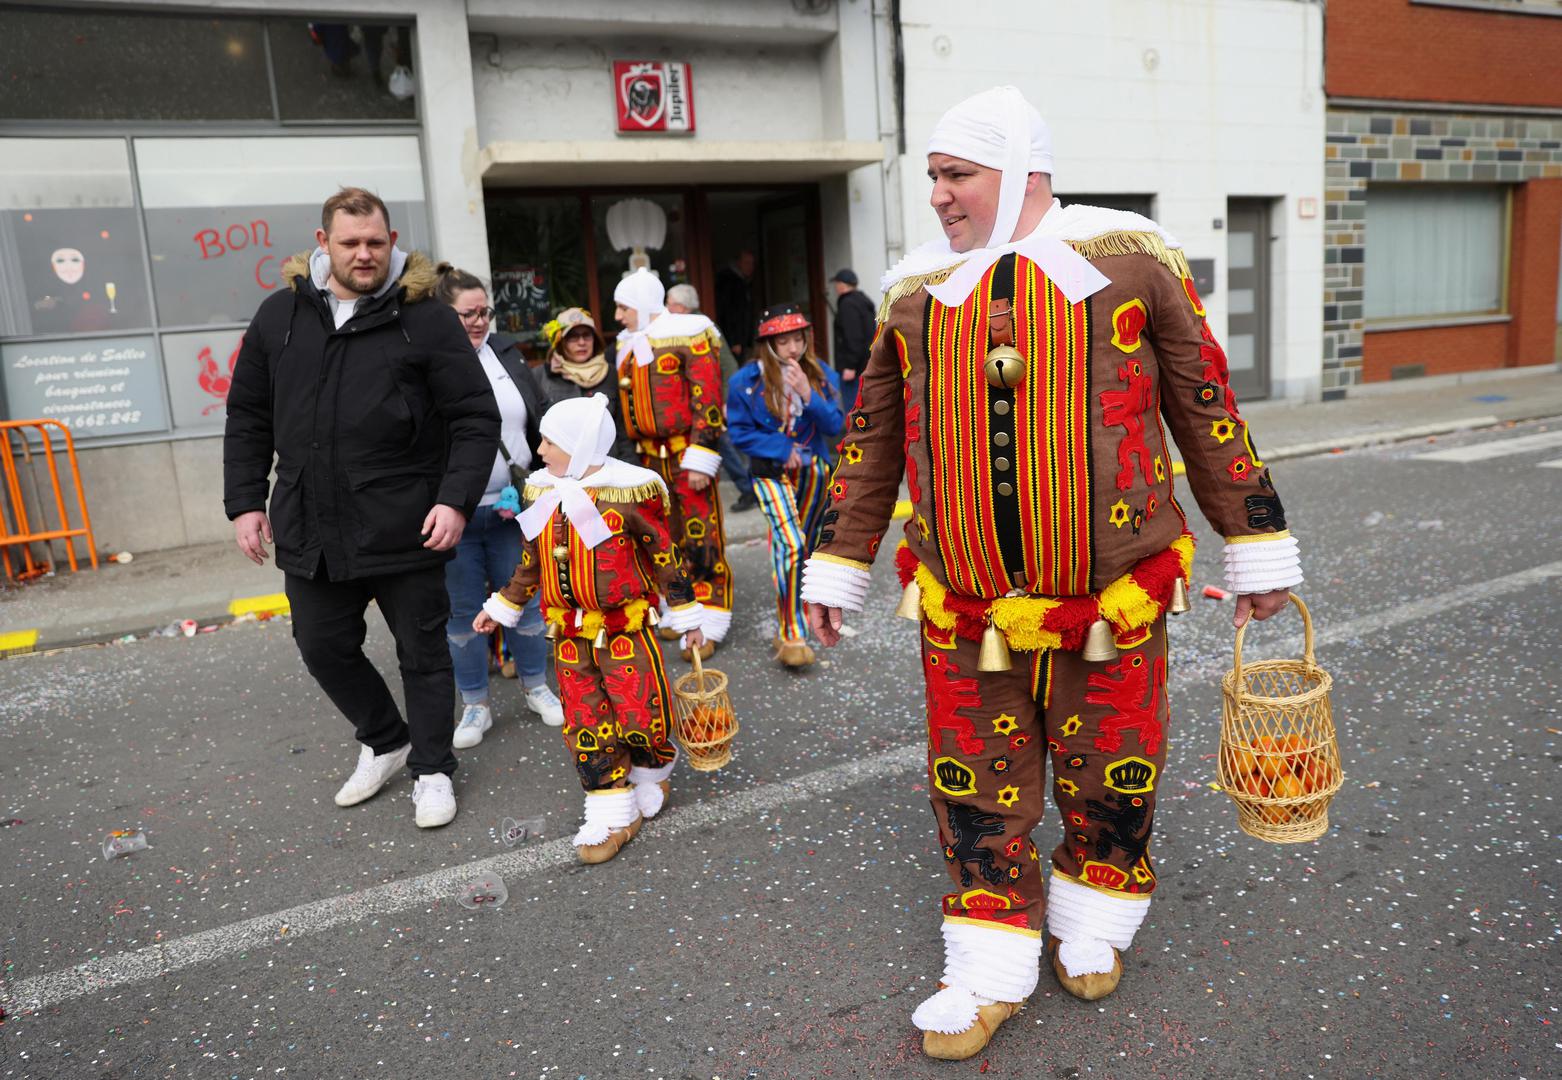 People wearing costumes walk near the site where a vehicle drove into a group of Belgian carnival performers who were preparing for a parade in the village of Strepy-Bracquegnies, Belgium March 20, 2022. REUTERS/Johanna Geron Photo: JOHANNA GERON/REUTERS